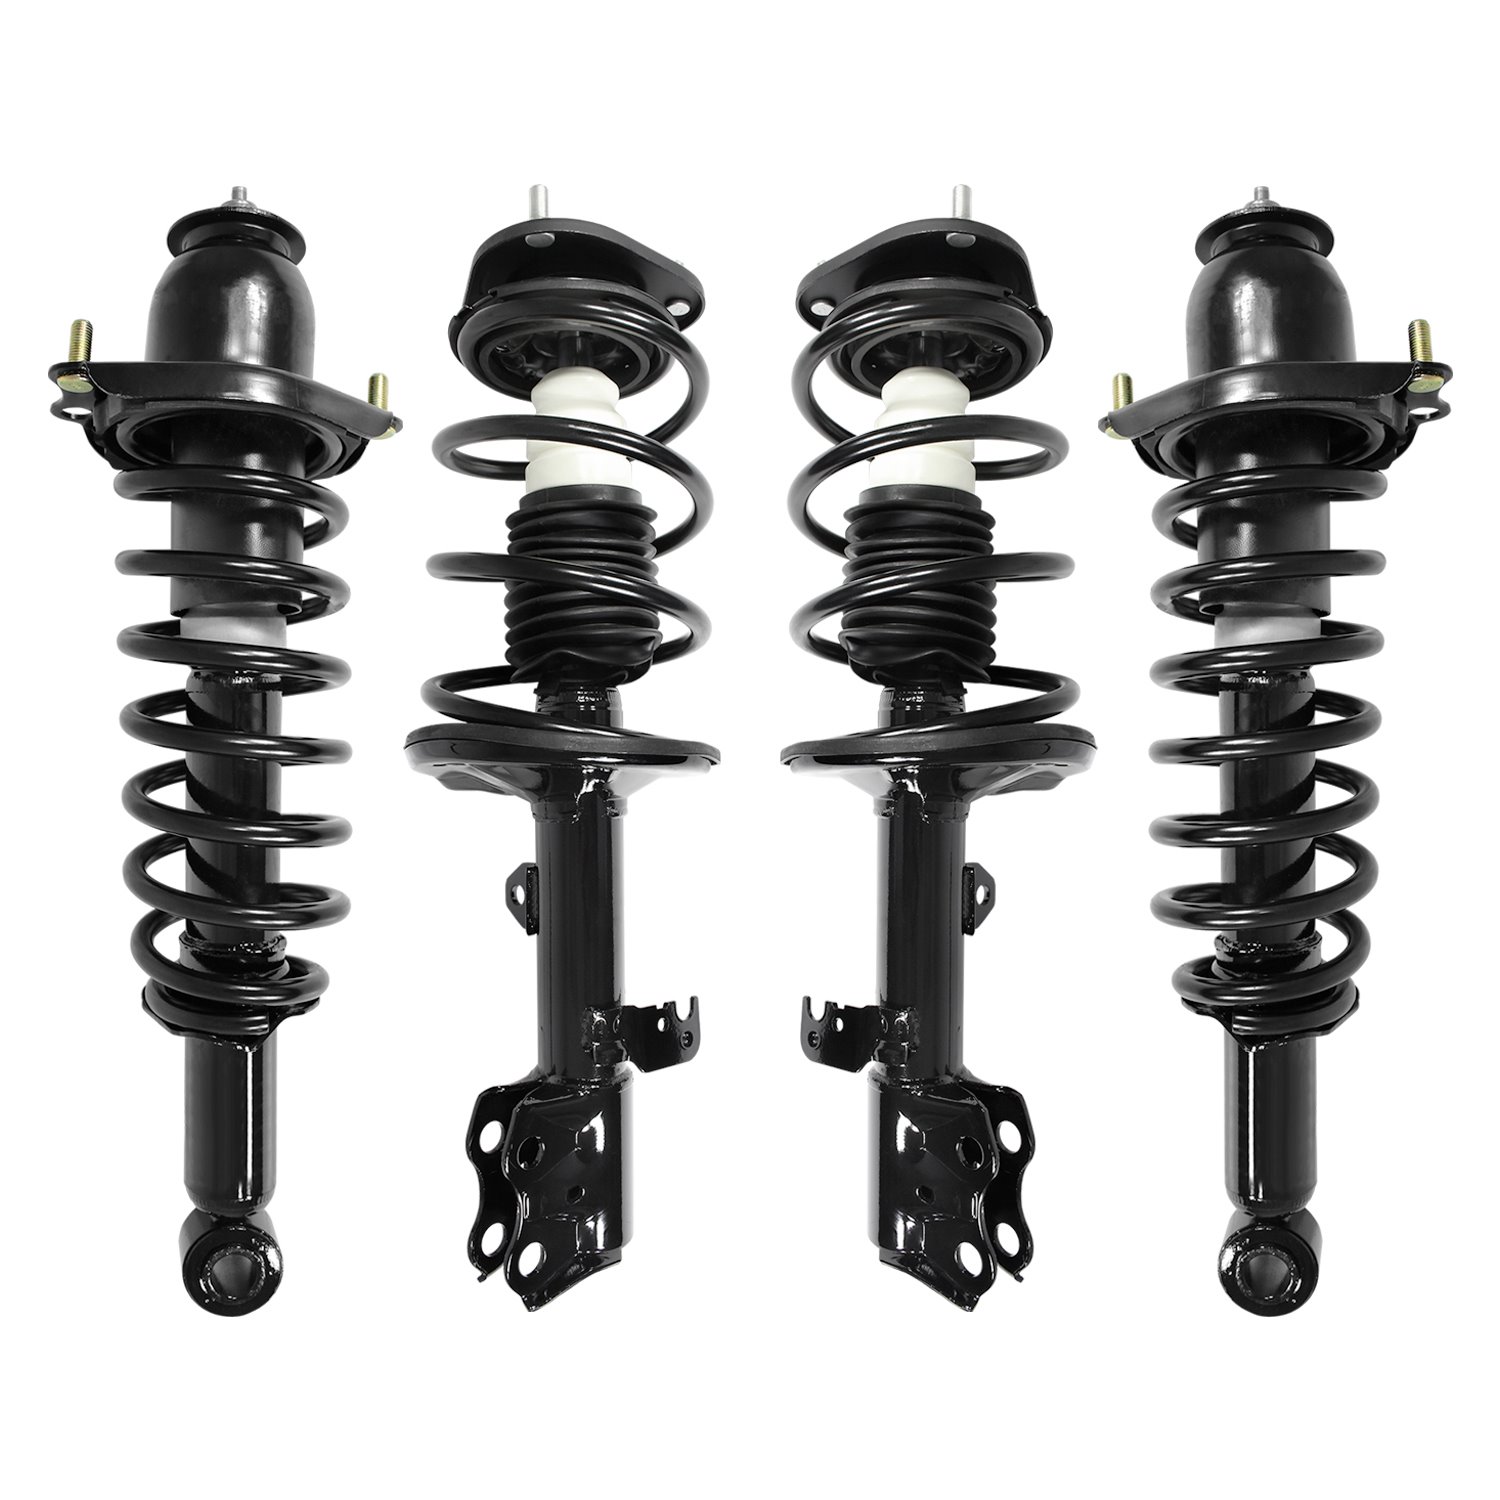 4-11573-15063-001 Front & Rear Suspension Strut & Coil Spring Assembly Kit Fits Select Pontiac/Toyota